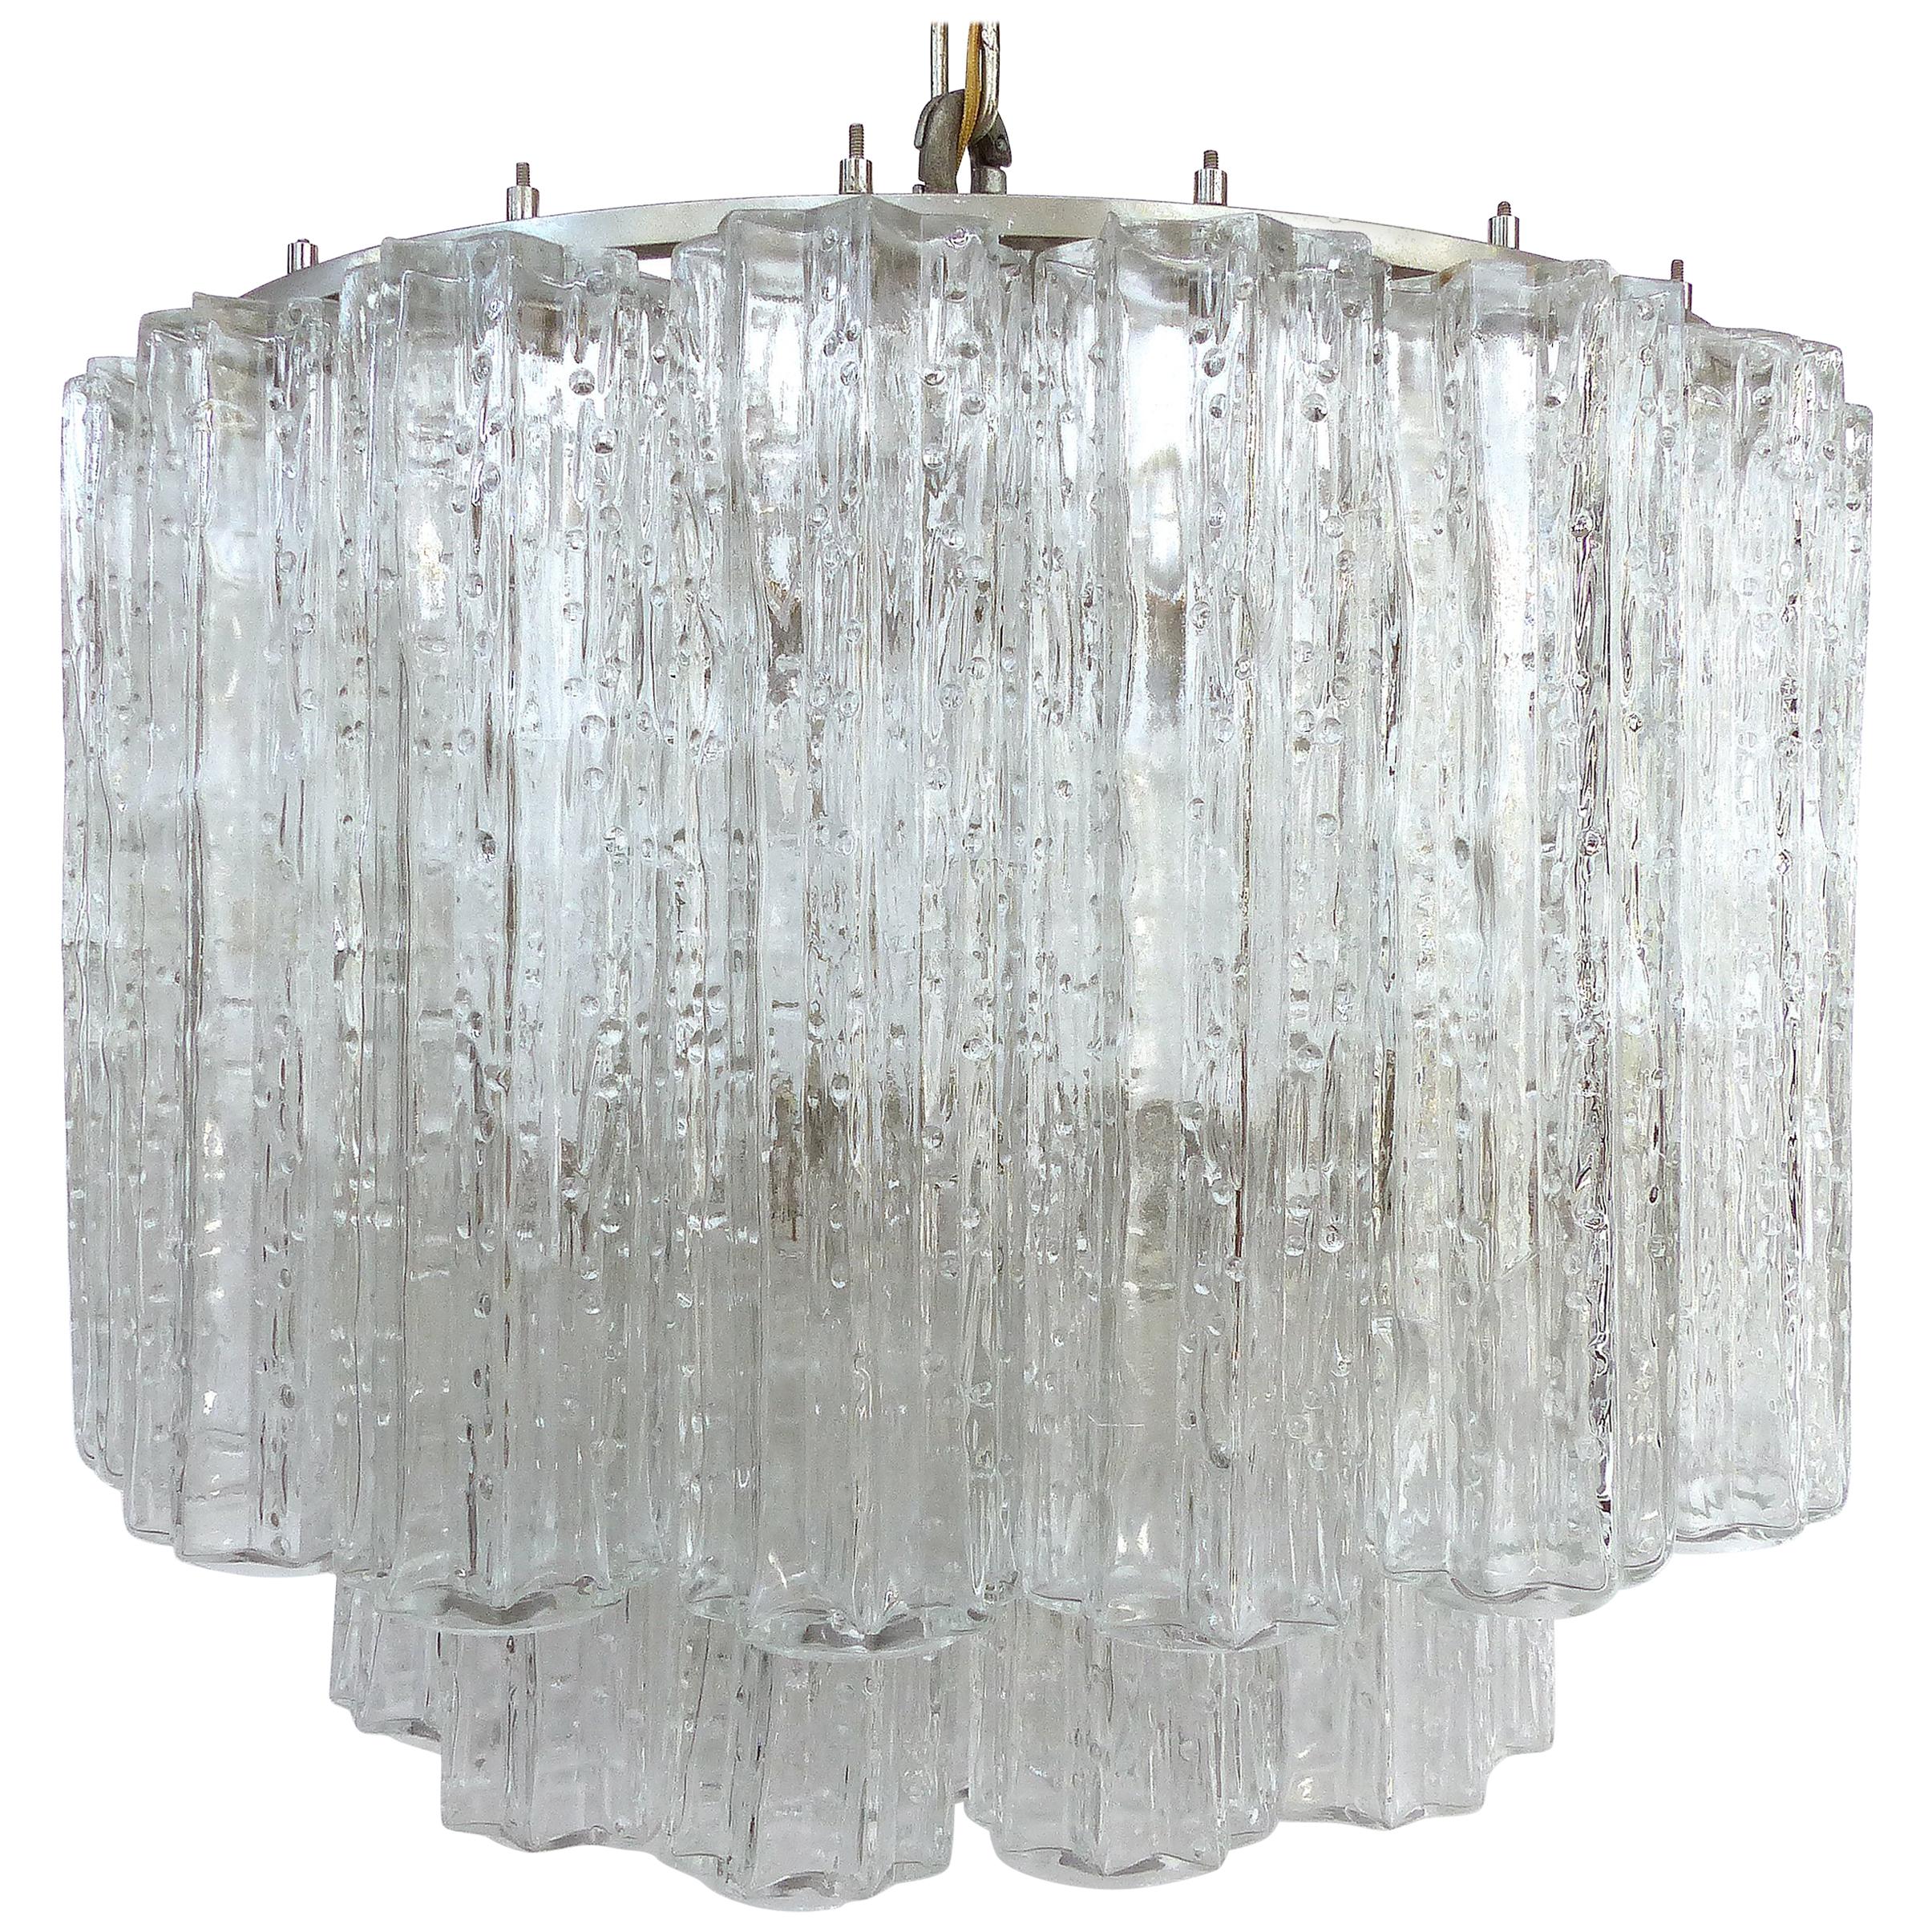 Mid-Century Modern Venini Blown Glass Chandelier with Two Tiers, Italy